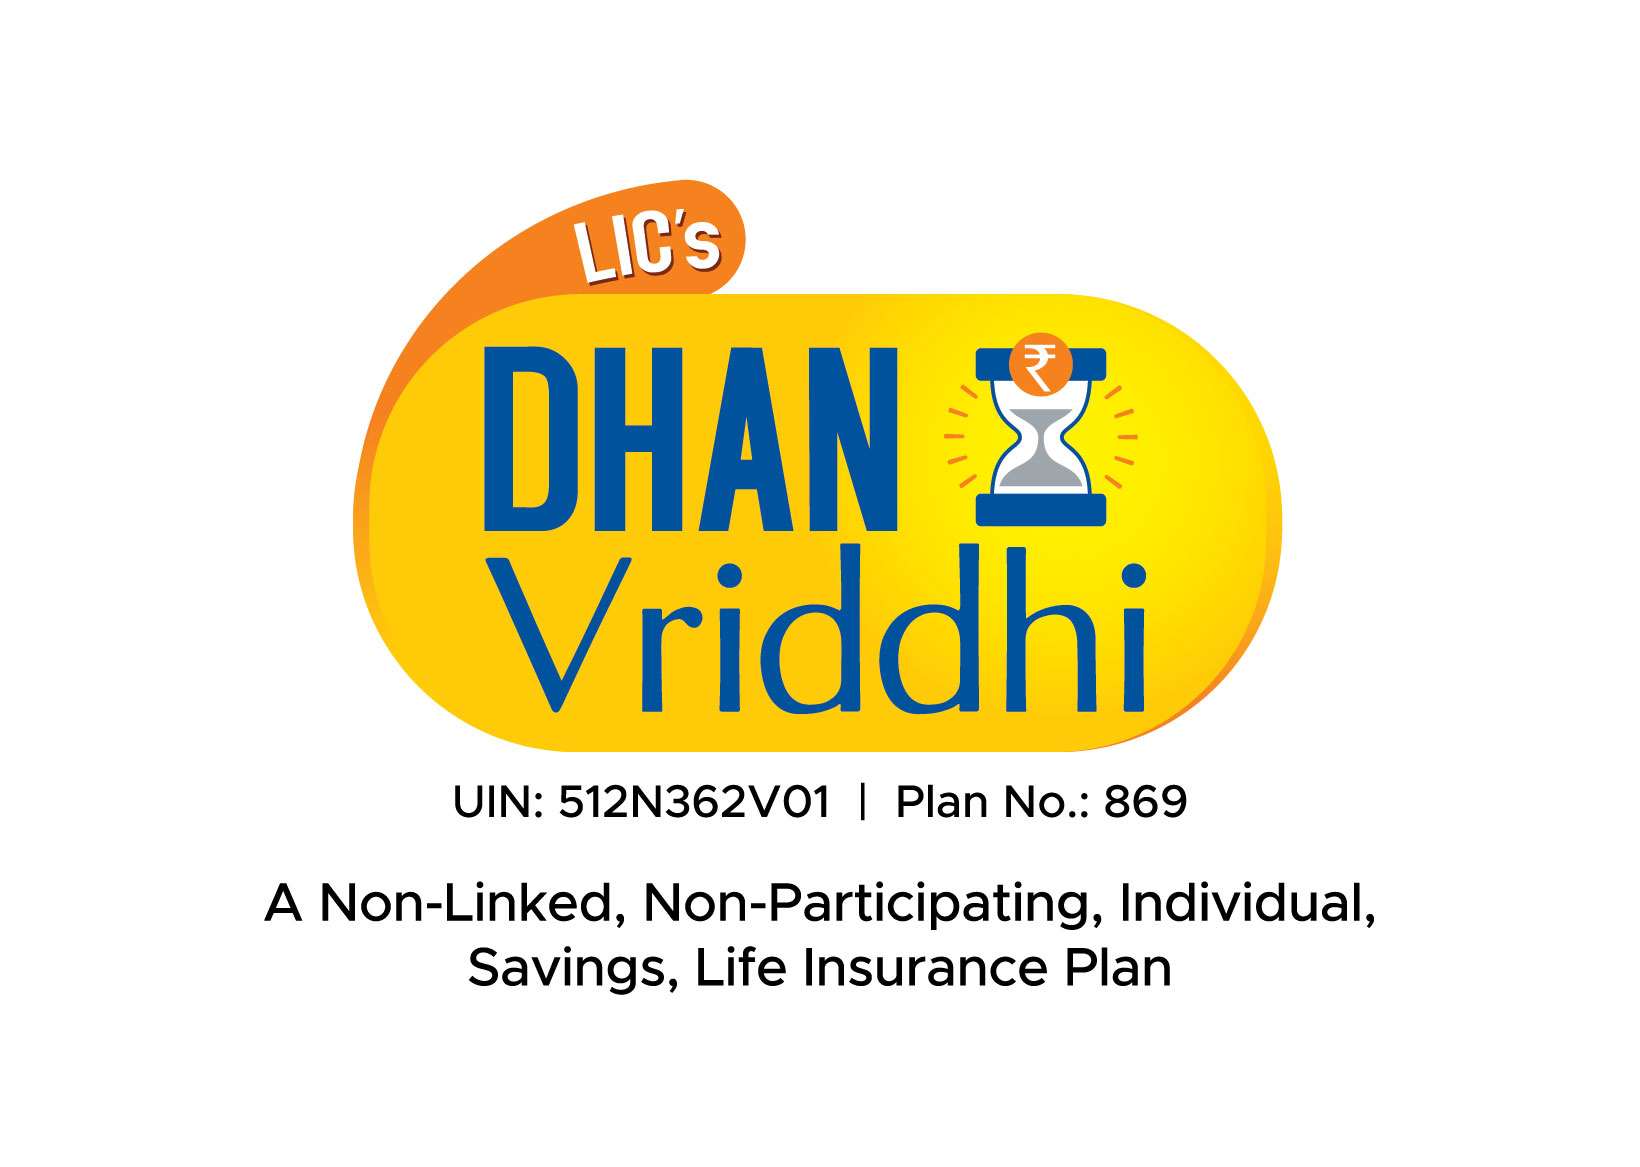 Image of LIC's Dhan Vruddhi